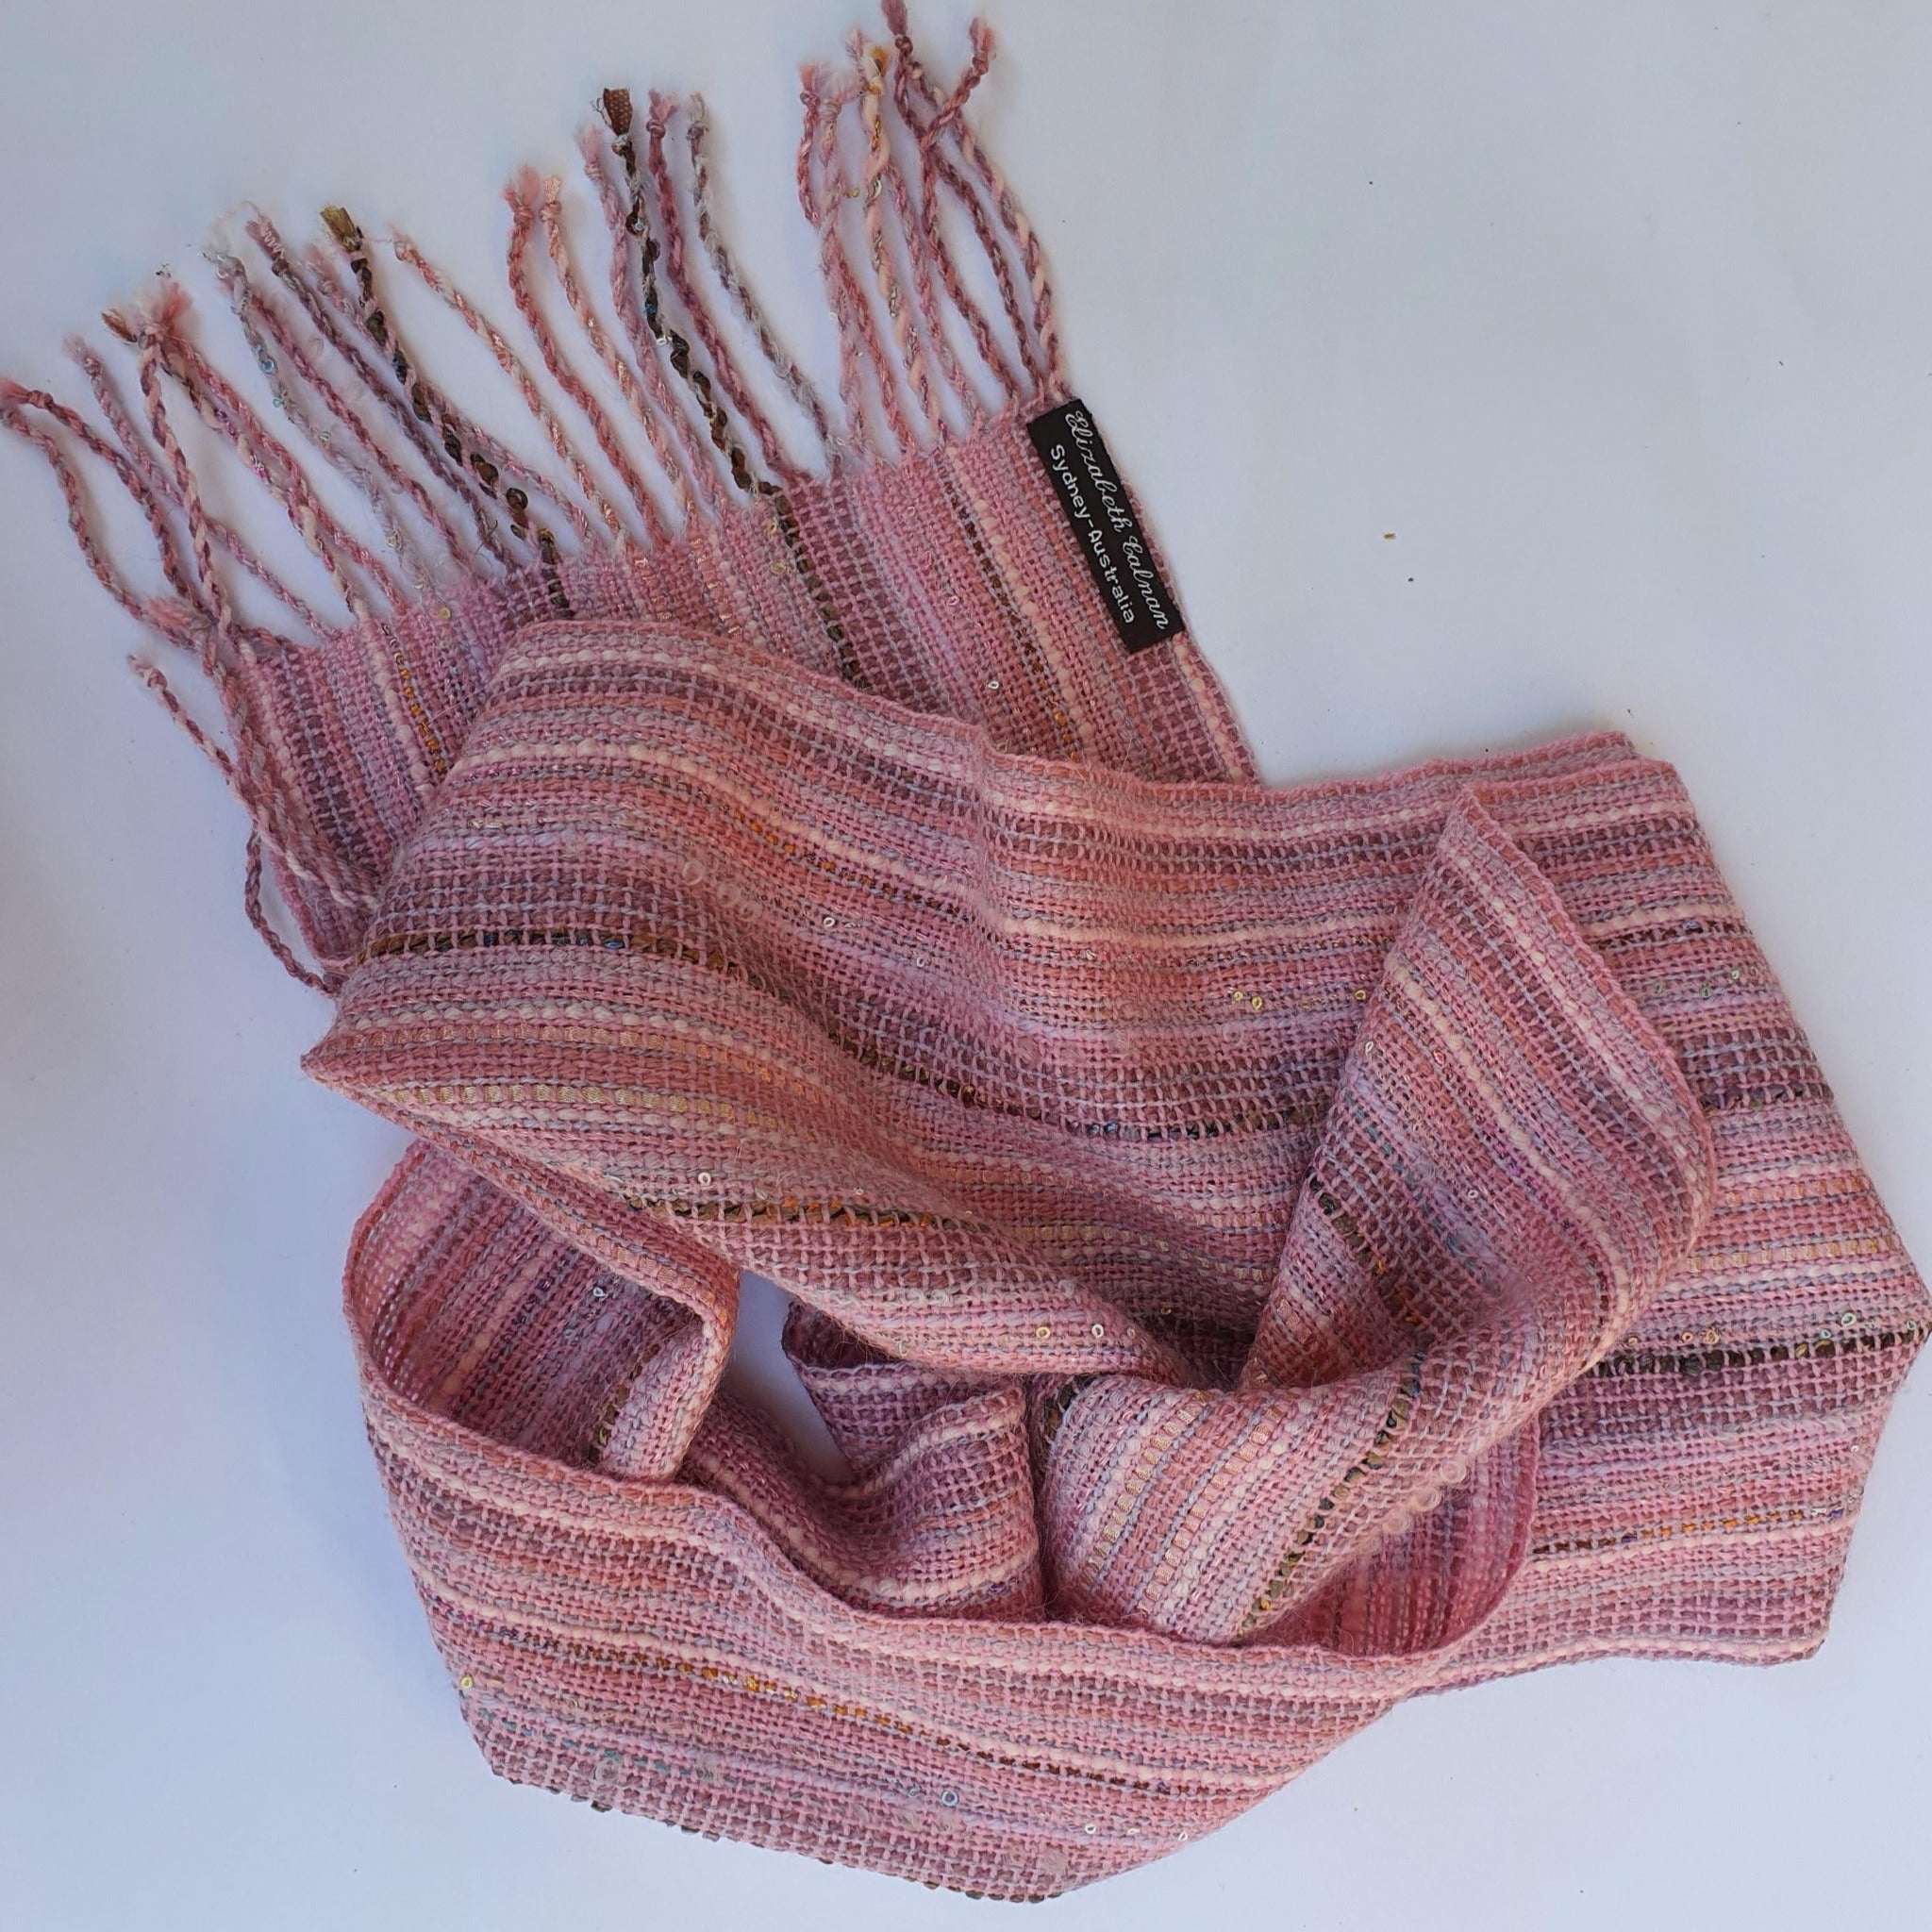 Pale pink wool and accent yarn scarf